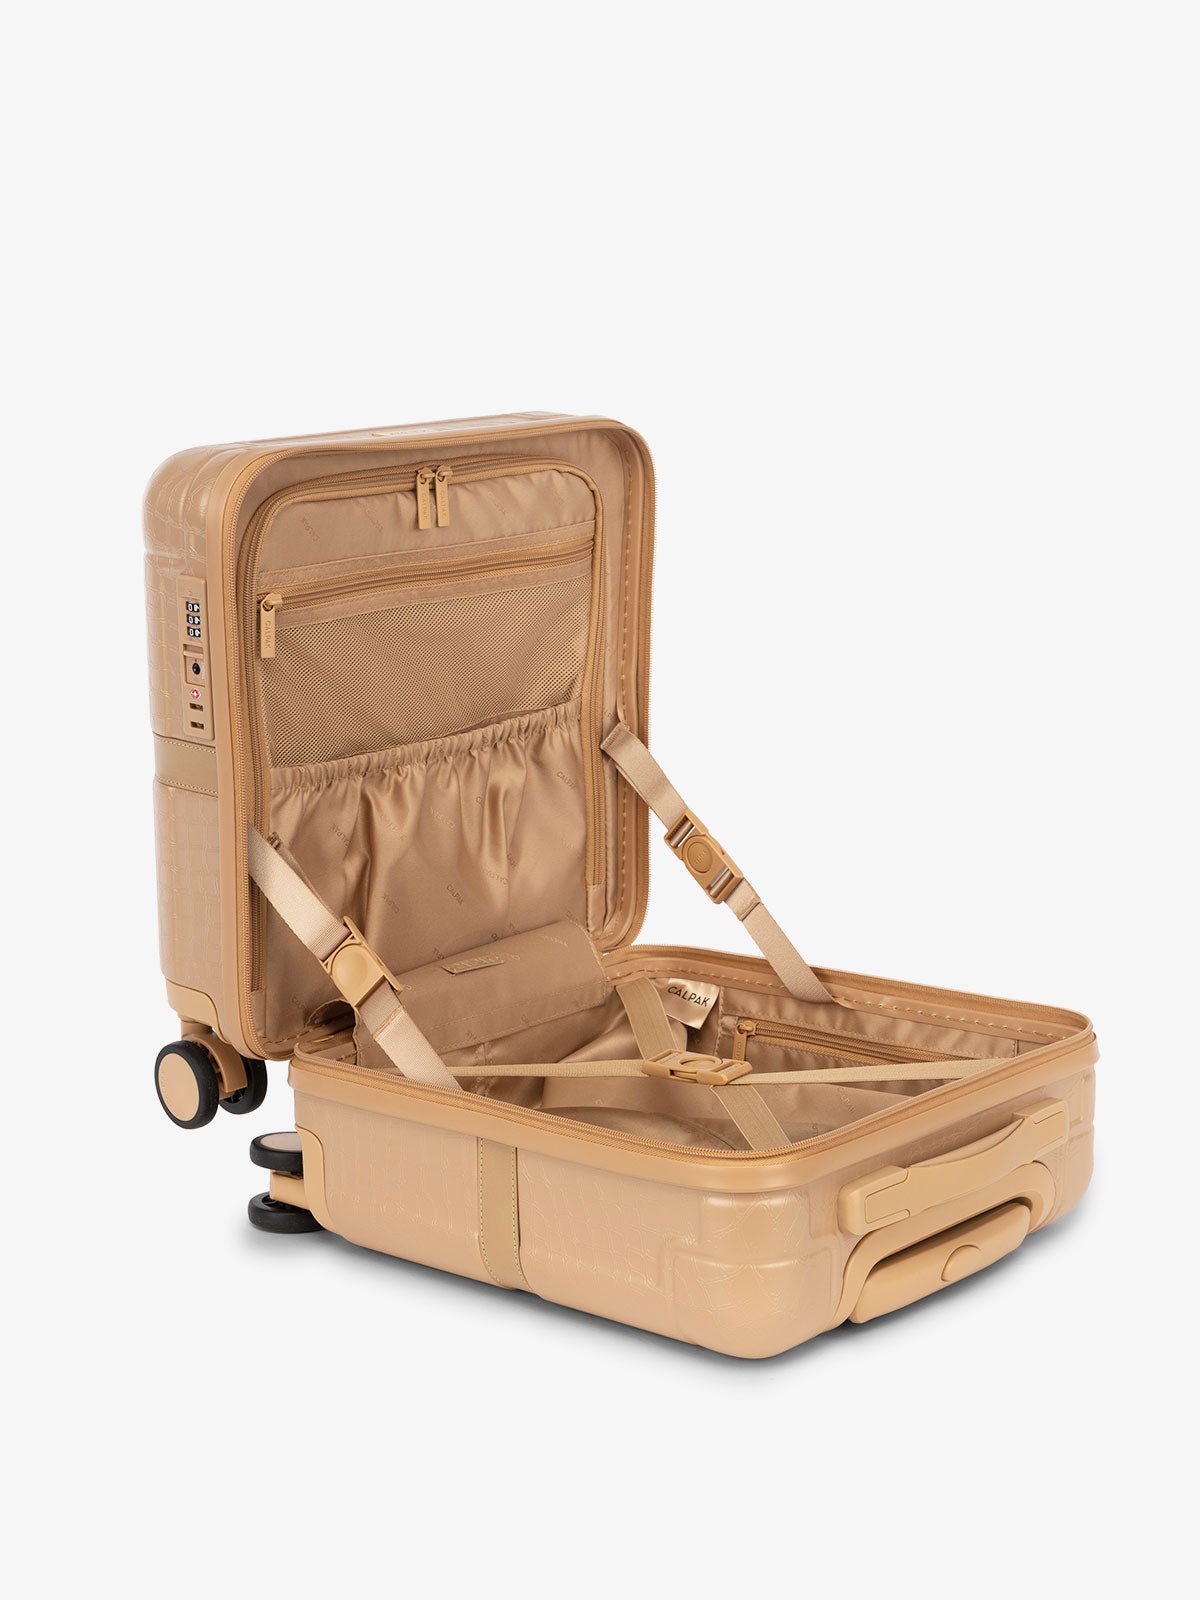 CALPAK TRNK small carry on luggage with wheels, interior compression strap and multiple pockets in almond